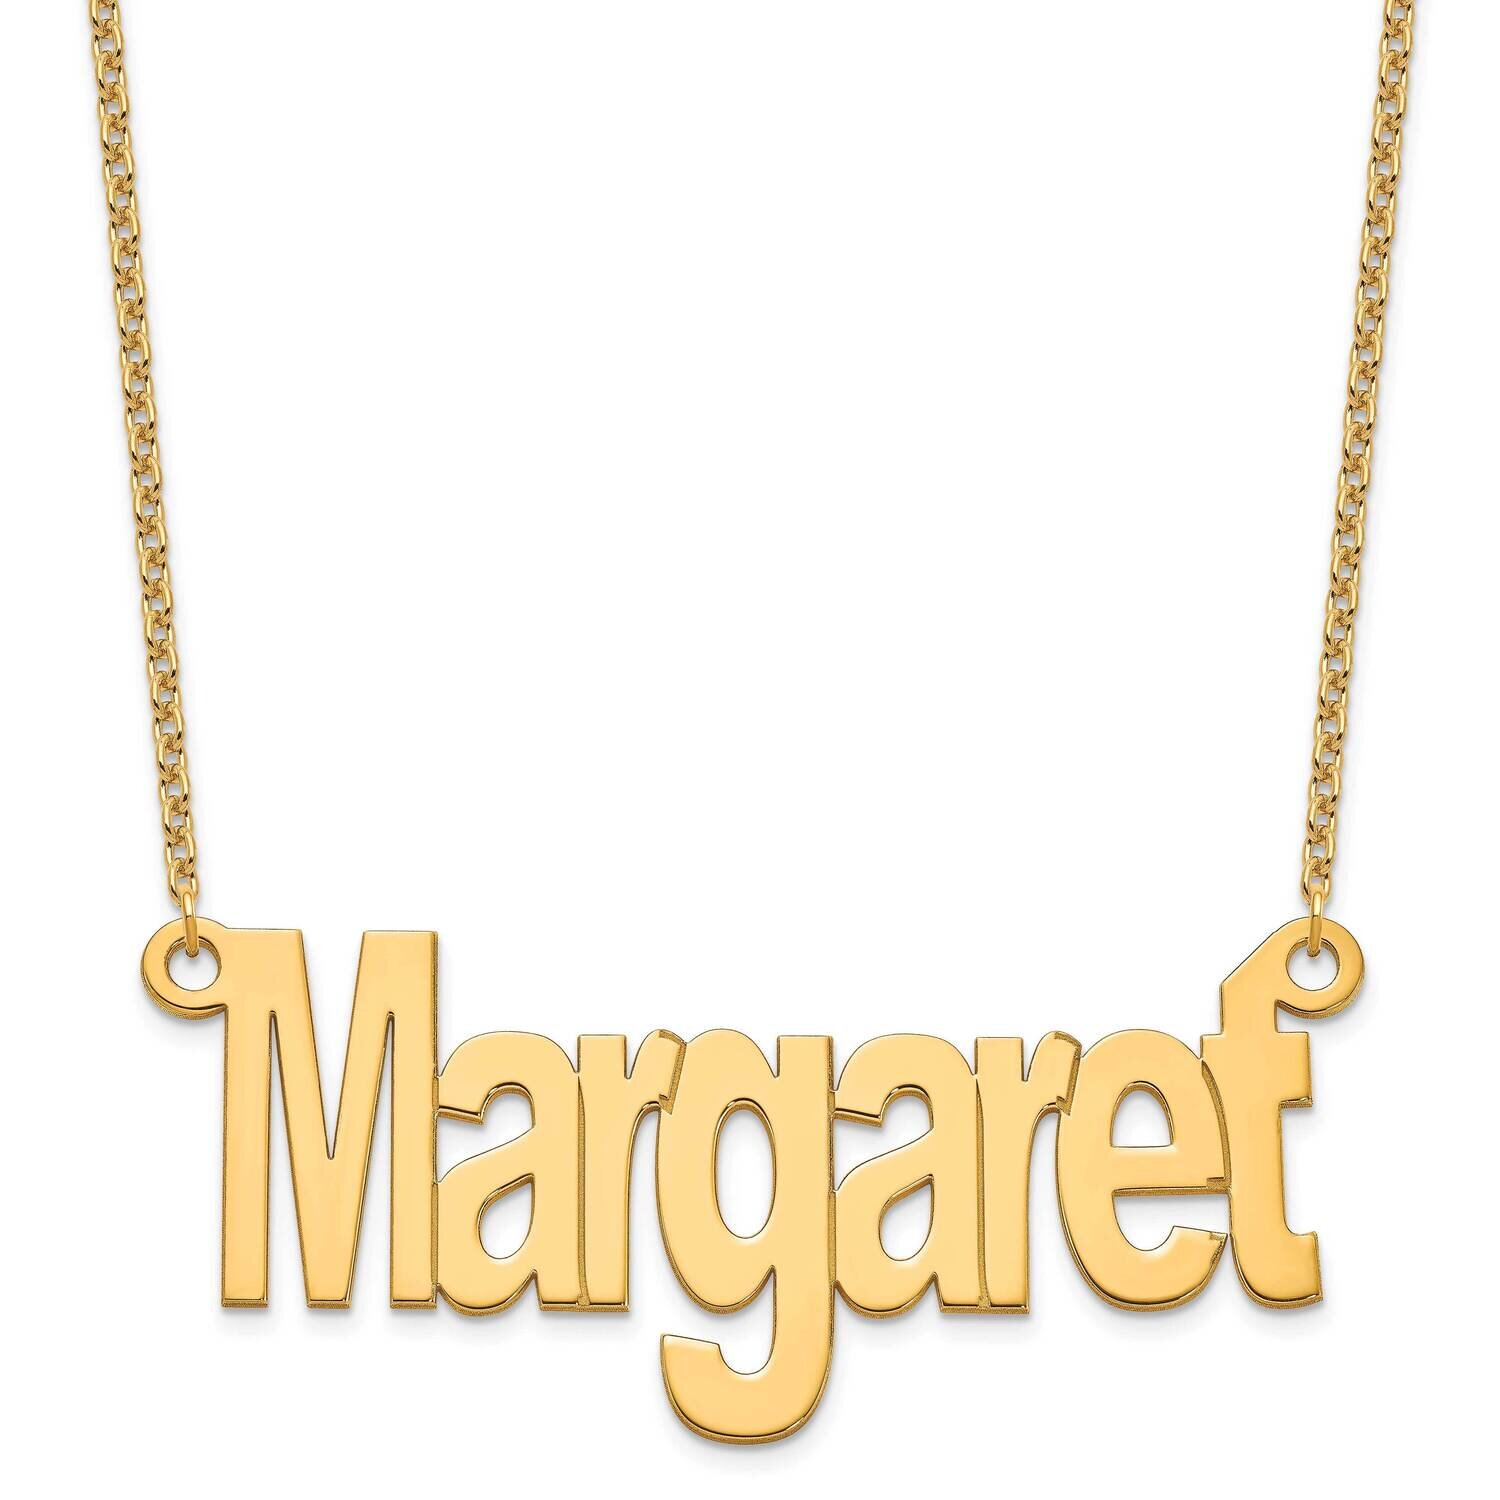 Large Name Plate Necklace Sterling Silver Gold-plated XNA1261GP